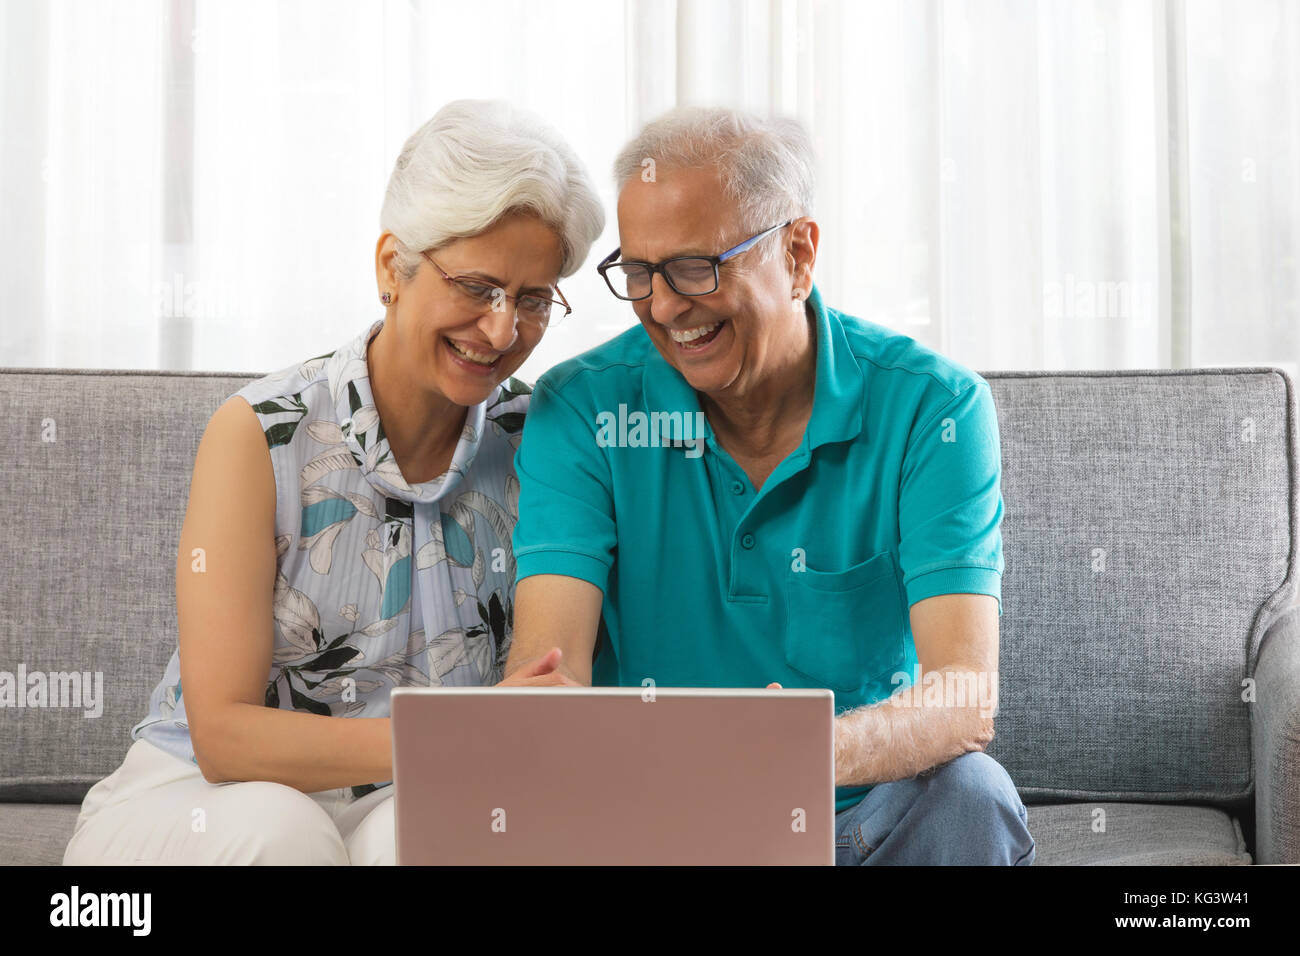 Happy senior couple sitting on sofa Banque D'Images